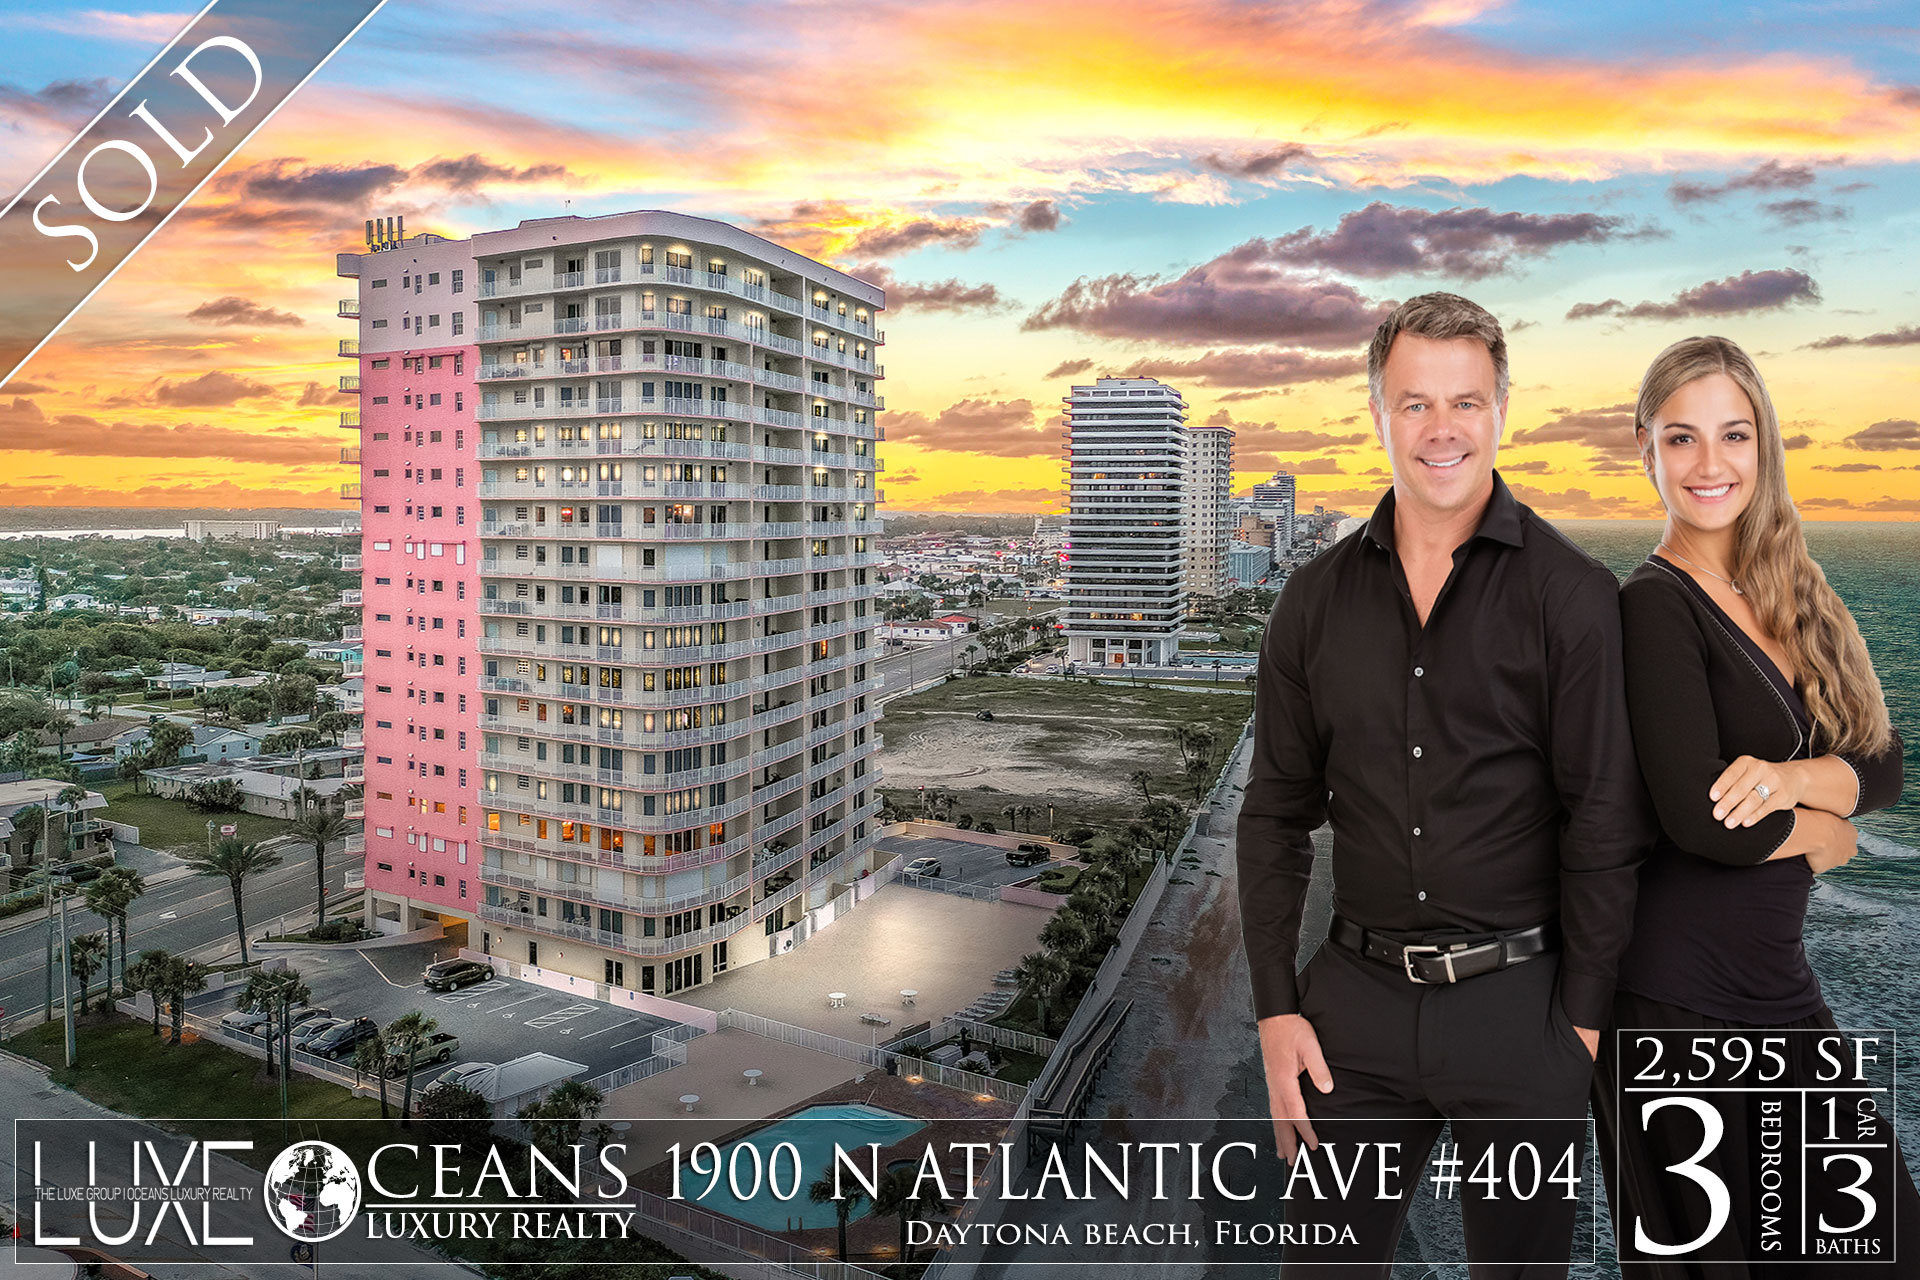 Island Crown oceanfront condos at 1900 N Atlantic Ave Daytona Beach Unit 404  Just Sold The LUXE Group 386-299-4043